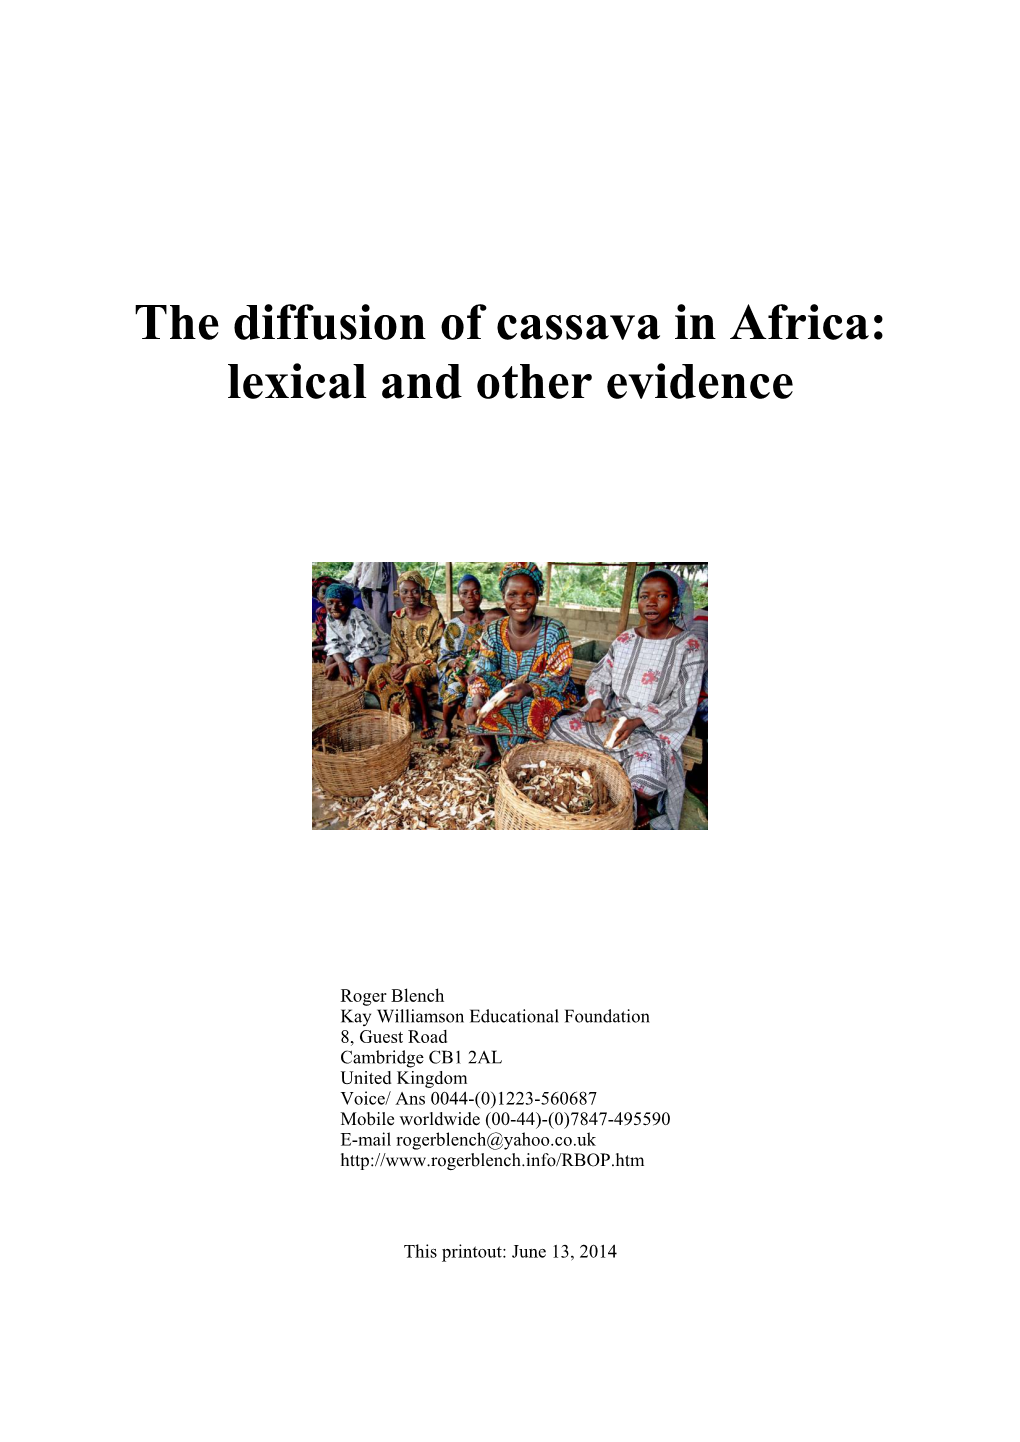 The Diffusion of Cassava in Africa: Lexical and Other Evidence